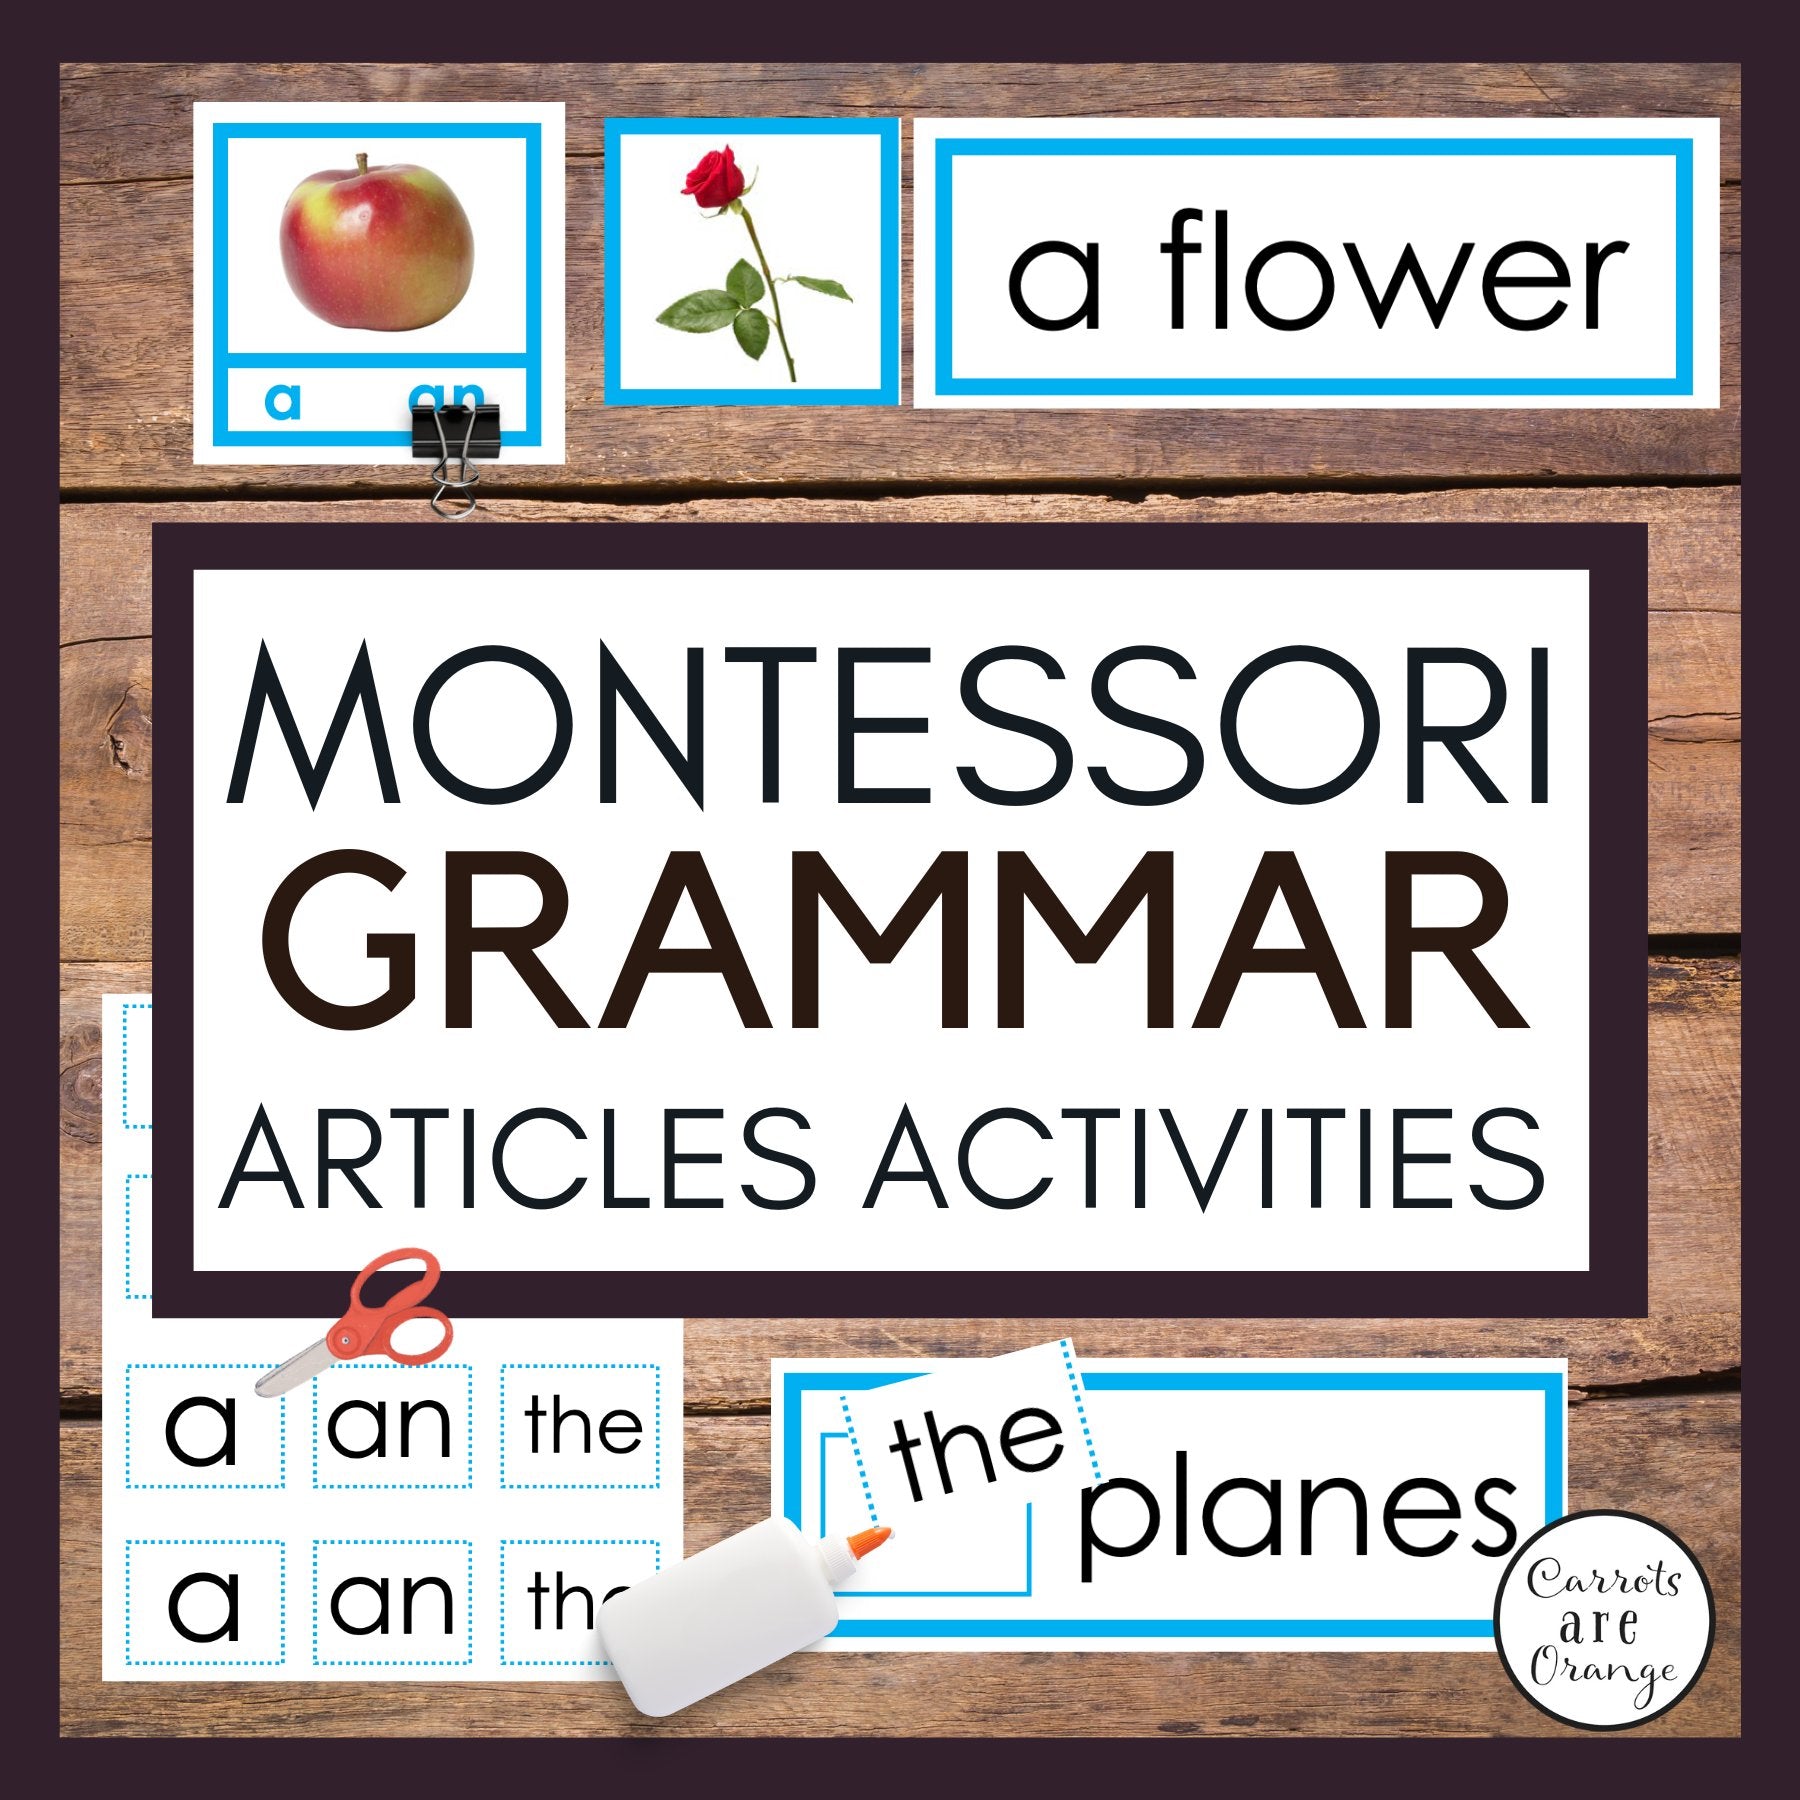 [Grammar] Articles Activities - Printables by Carrots Are Orange